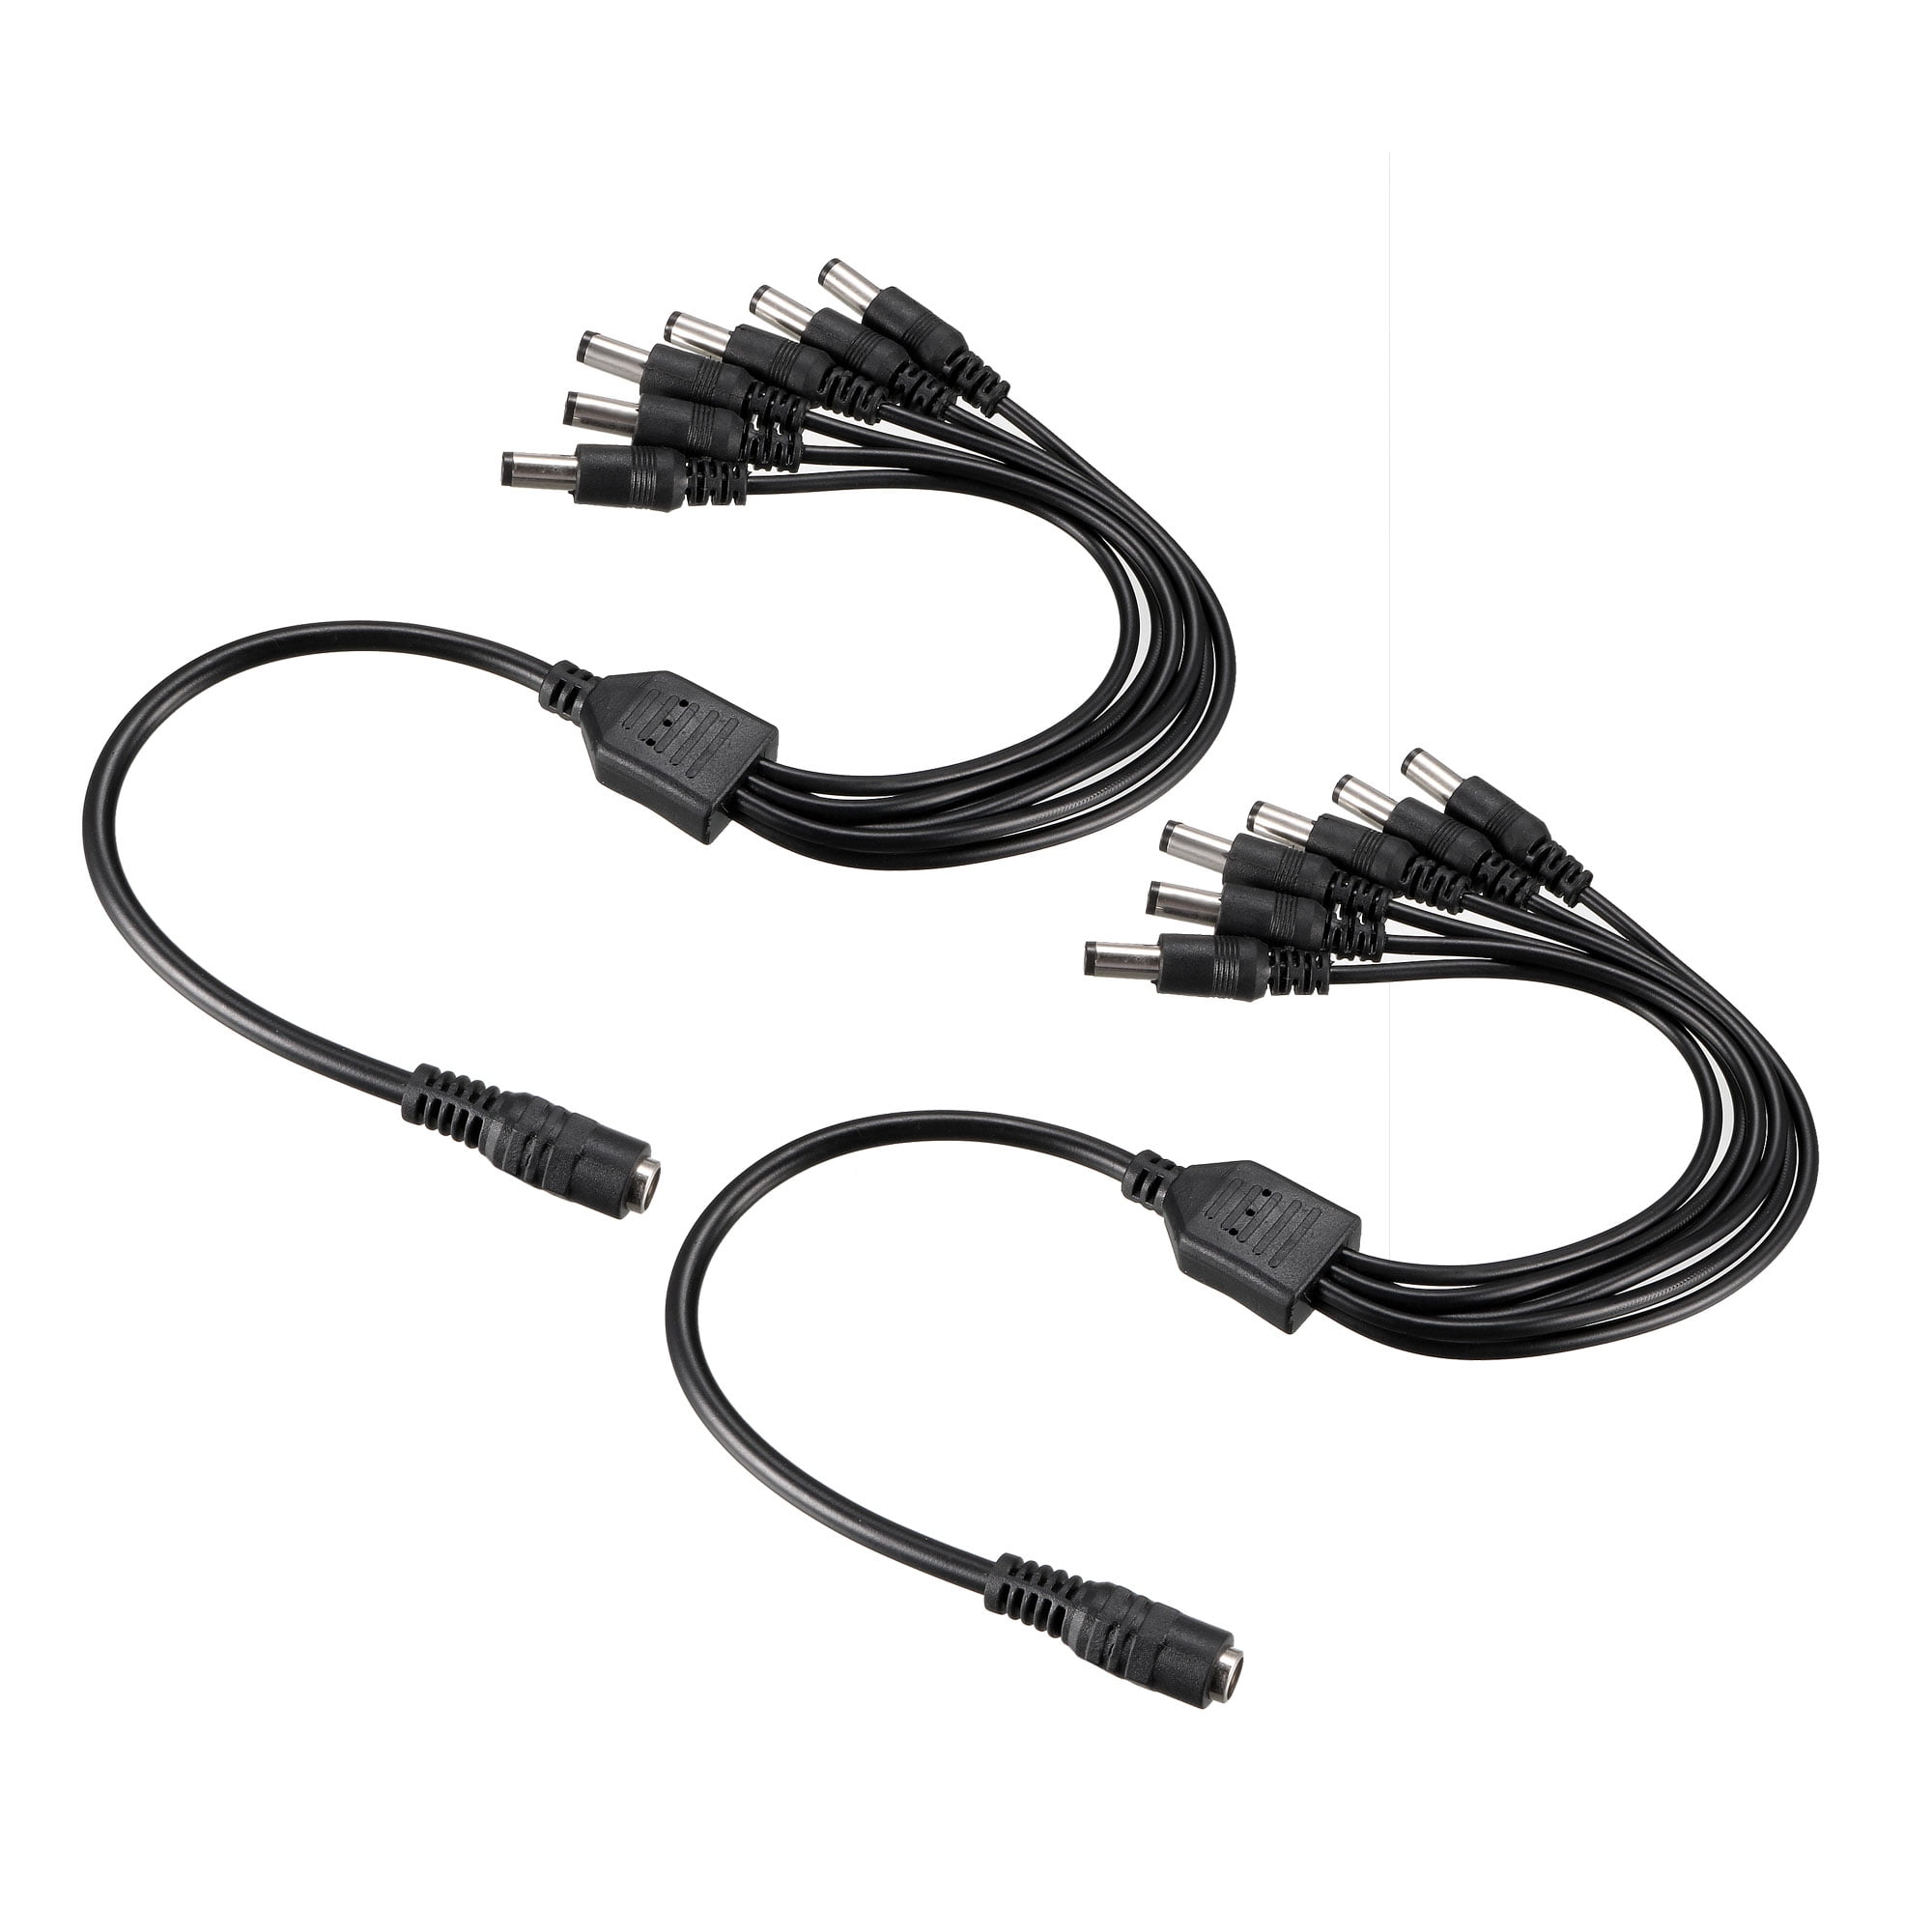 2pcs 5.5mm One to Double DC Power Supply Splitter Cable 